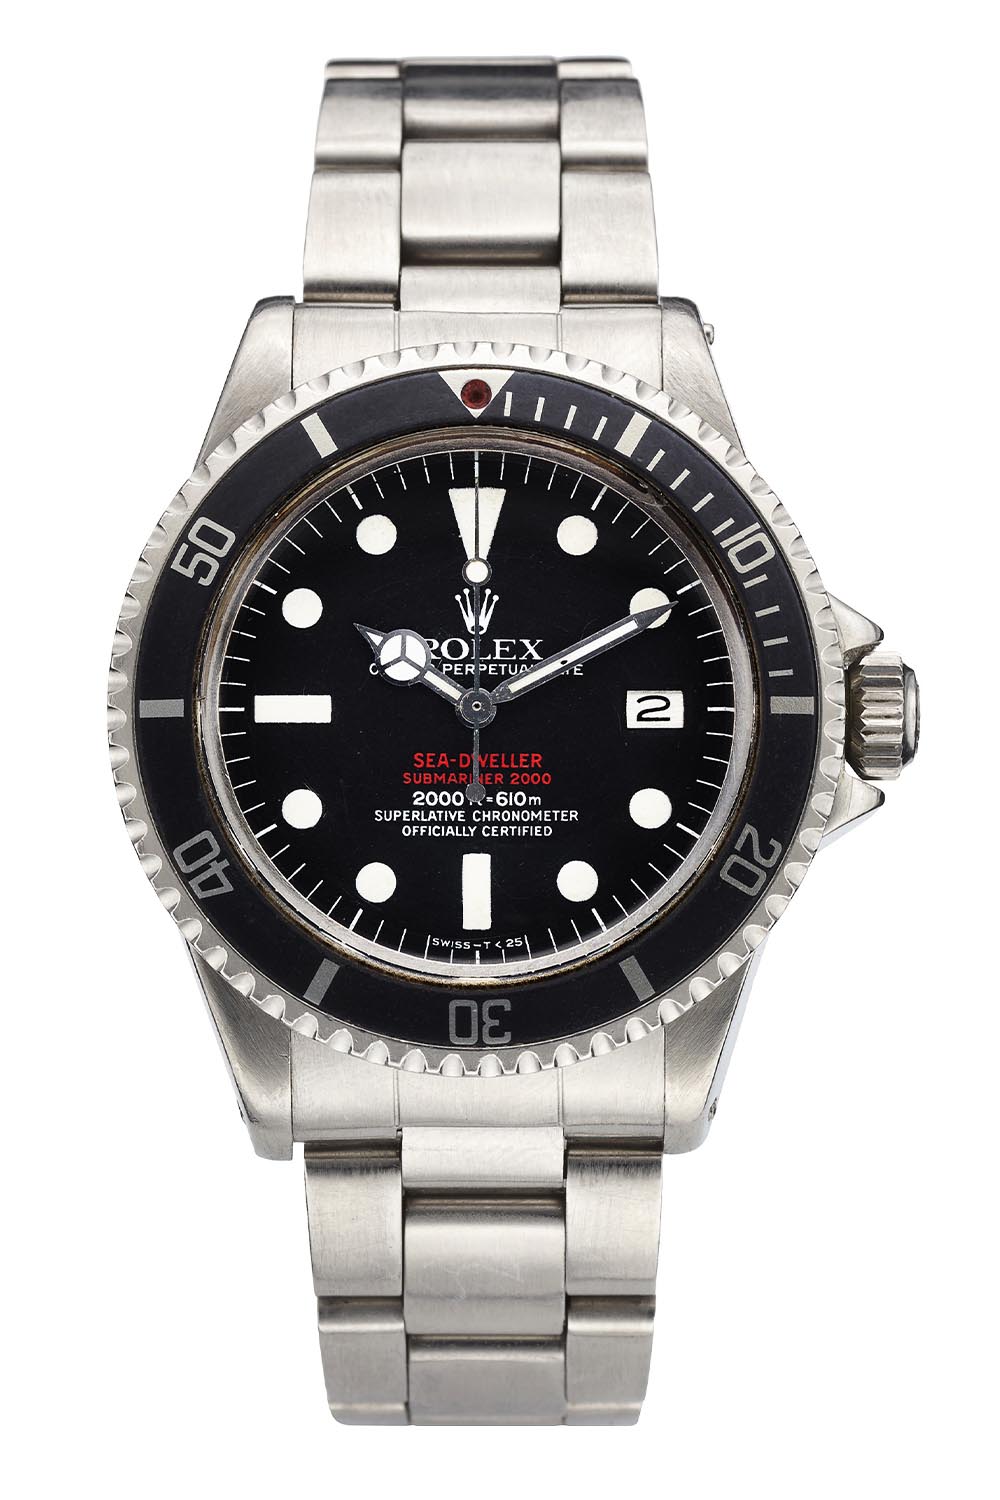 Sea-Dweller Double Red reference 1665 - image by Christie's